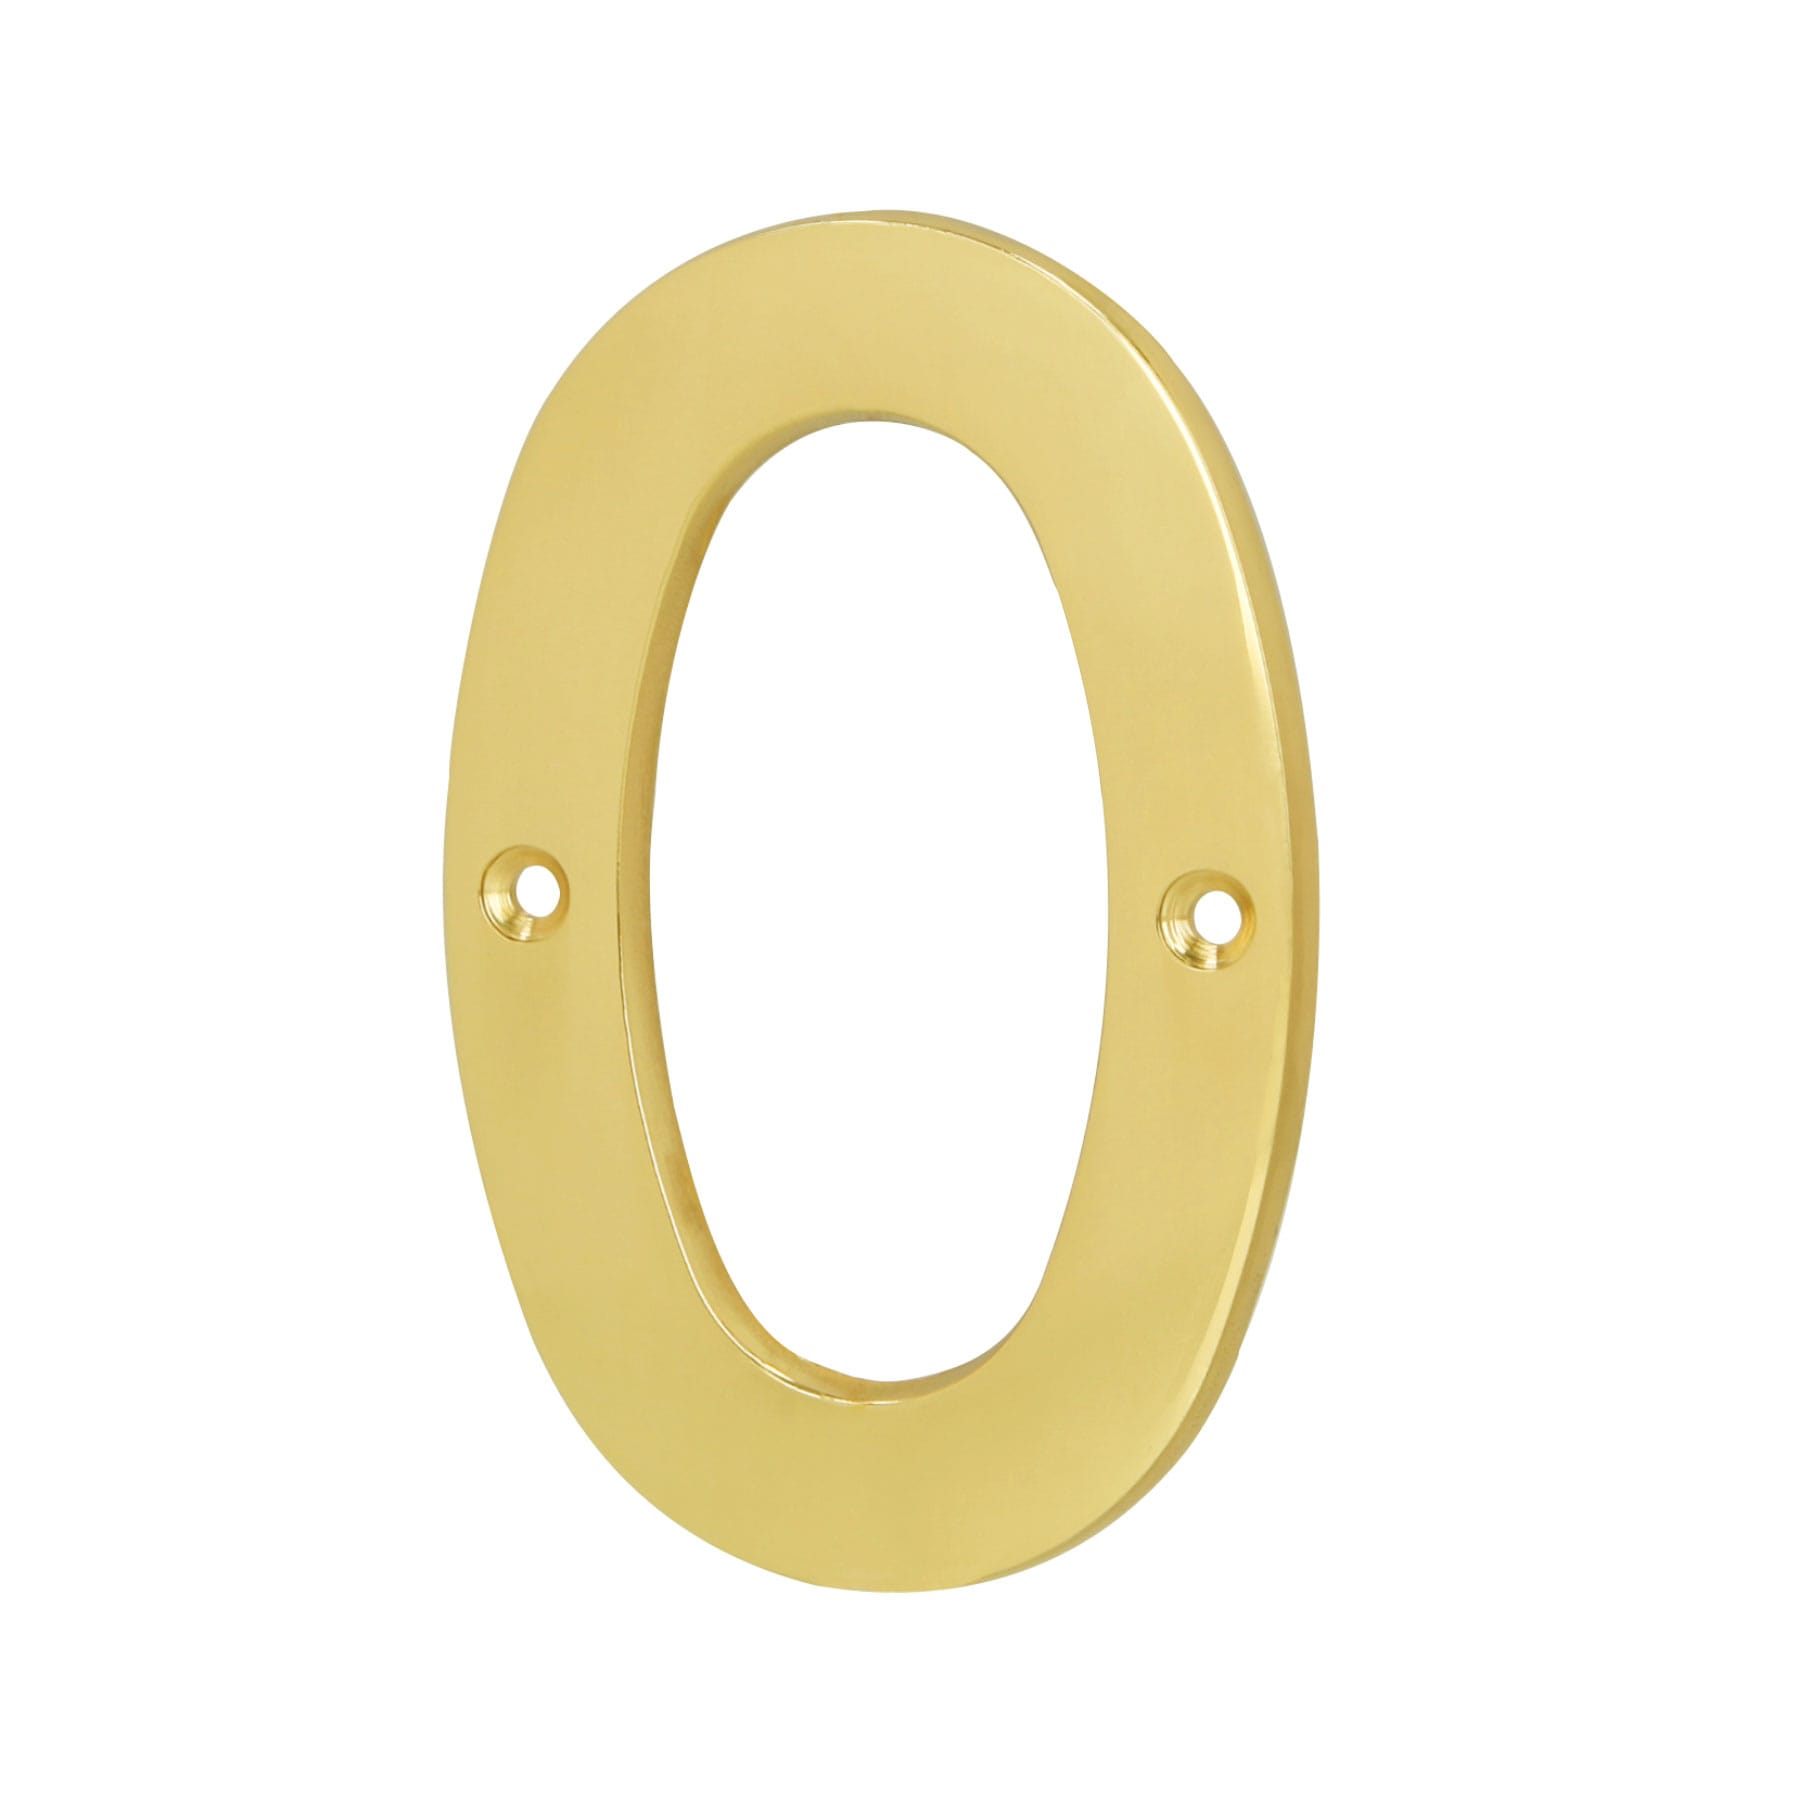 Hermex Solid Brass Numbers 4"